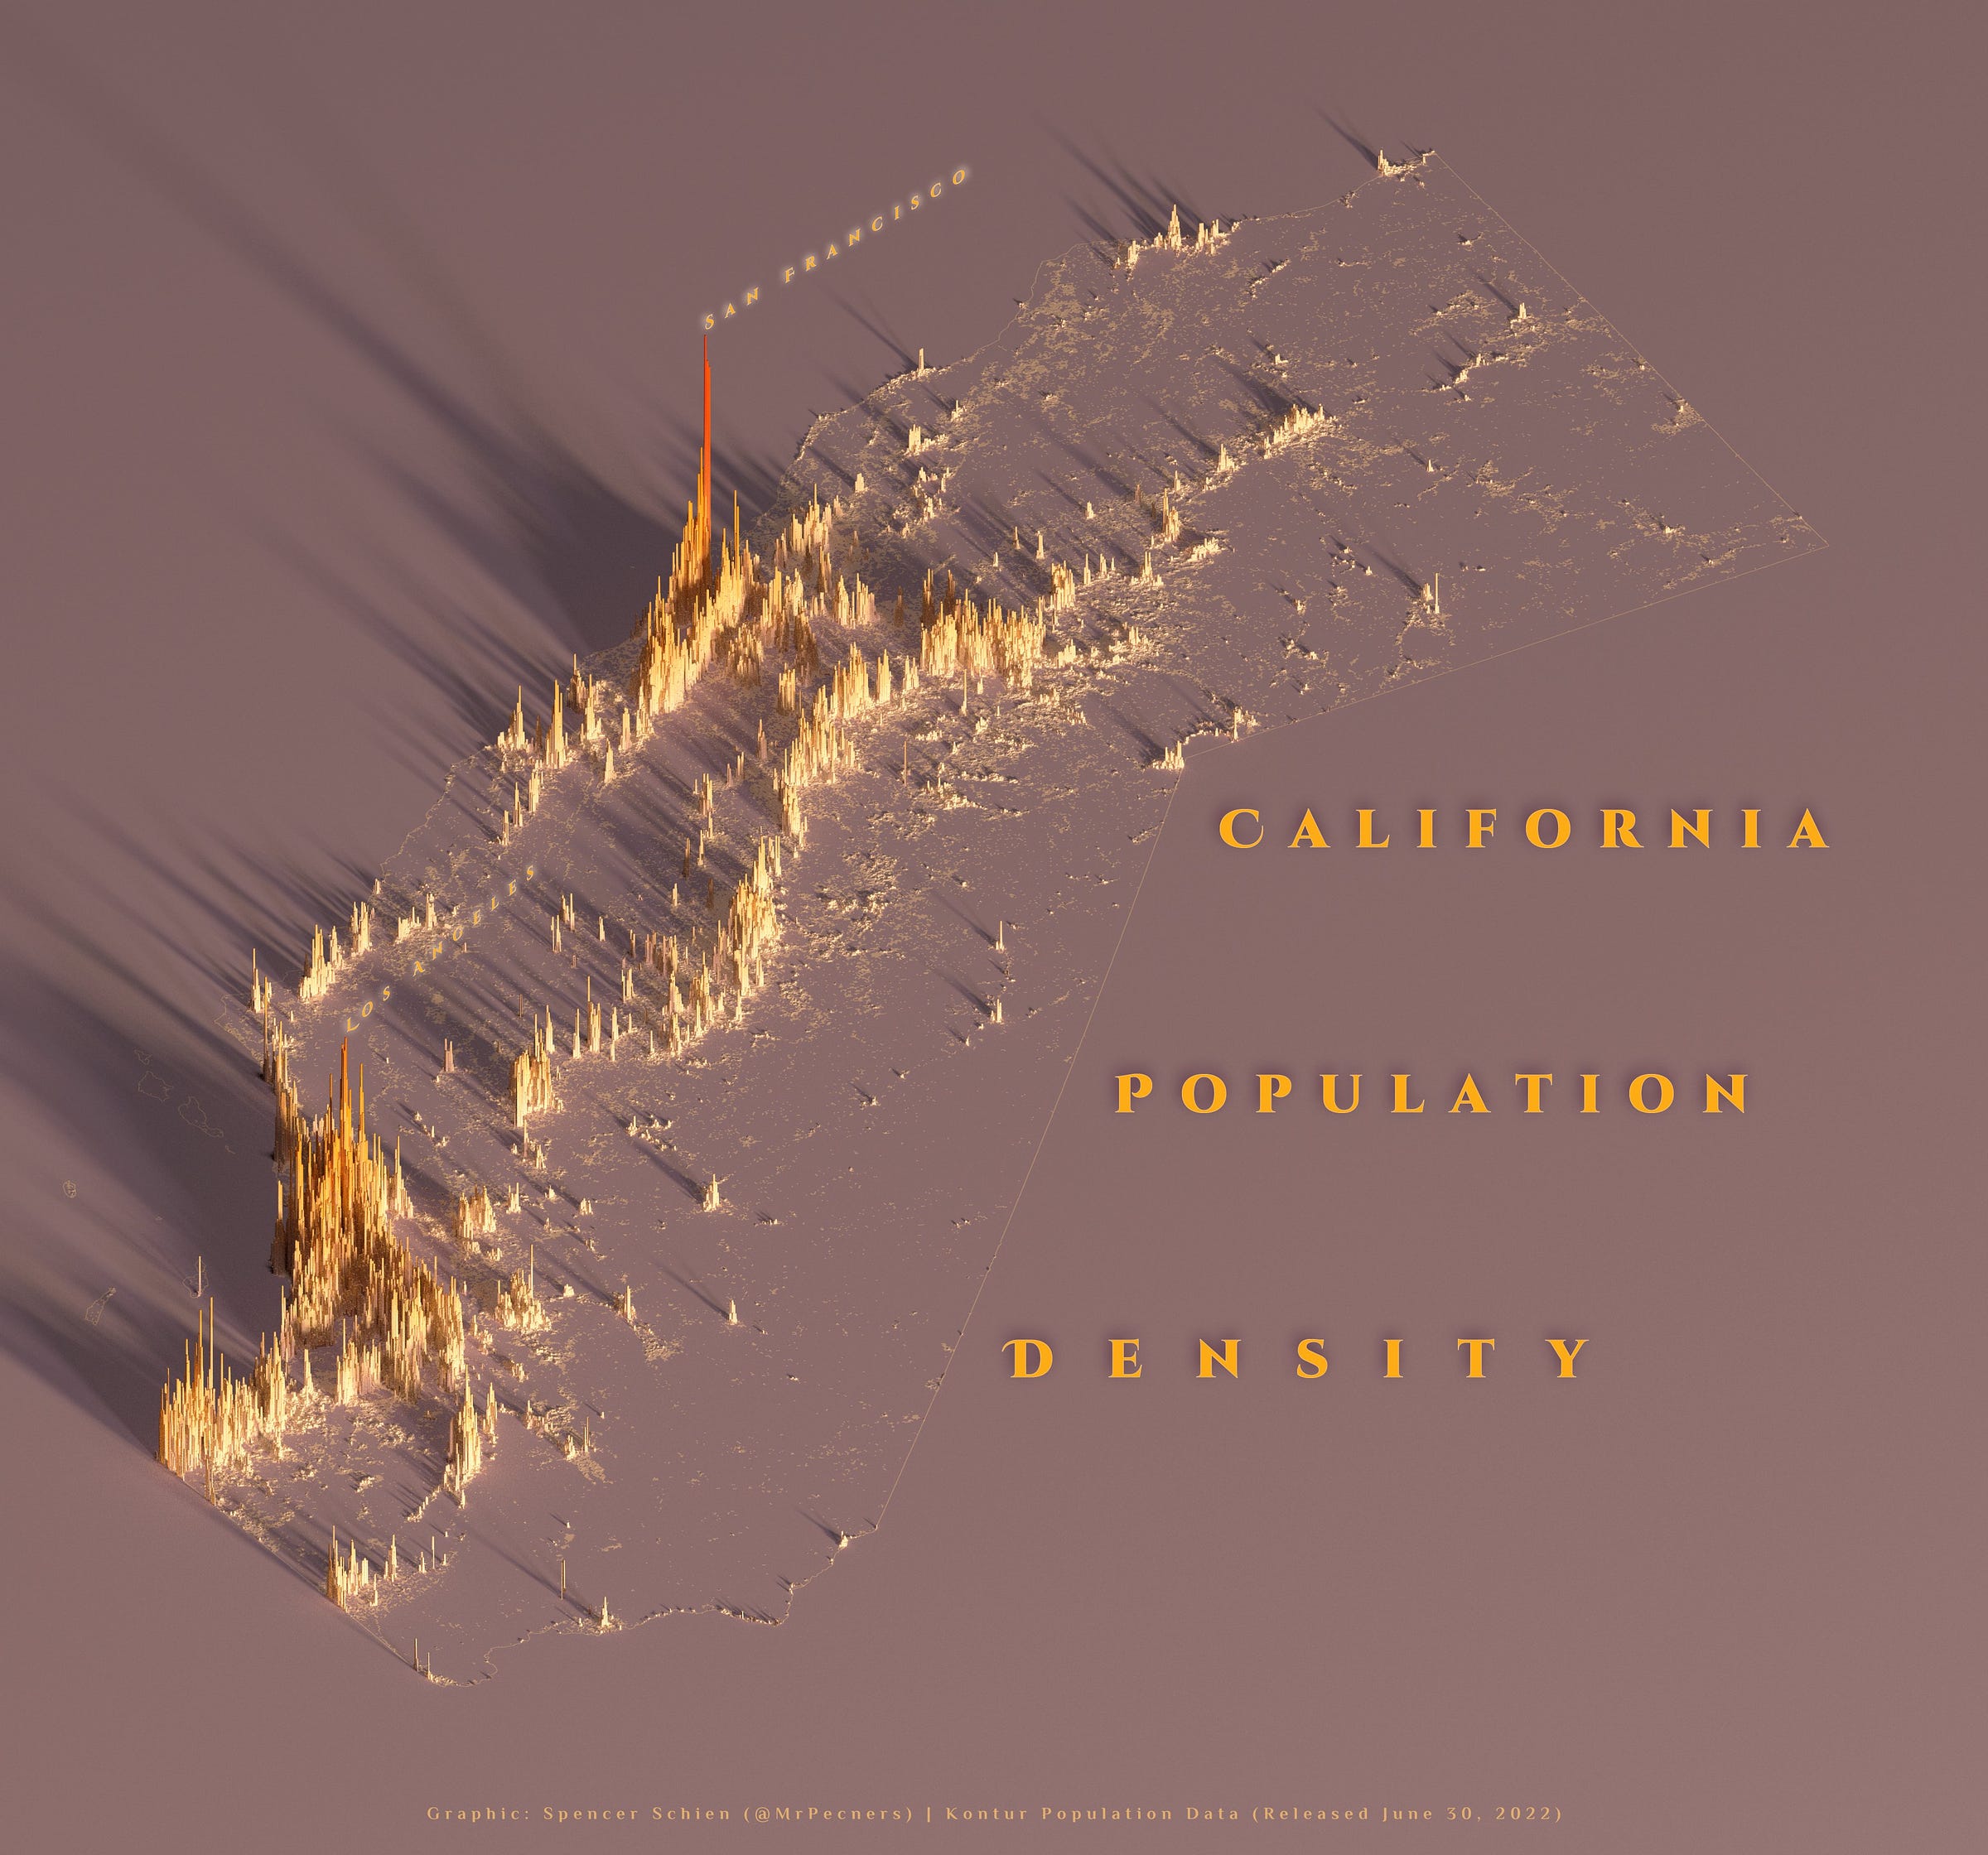 Population density map of California, rendered in R using the rayshader package.